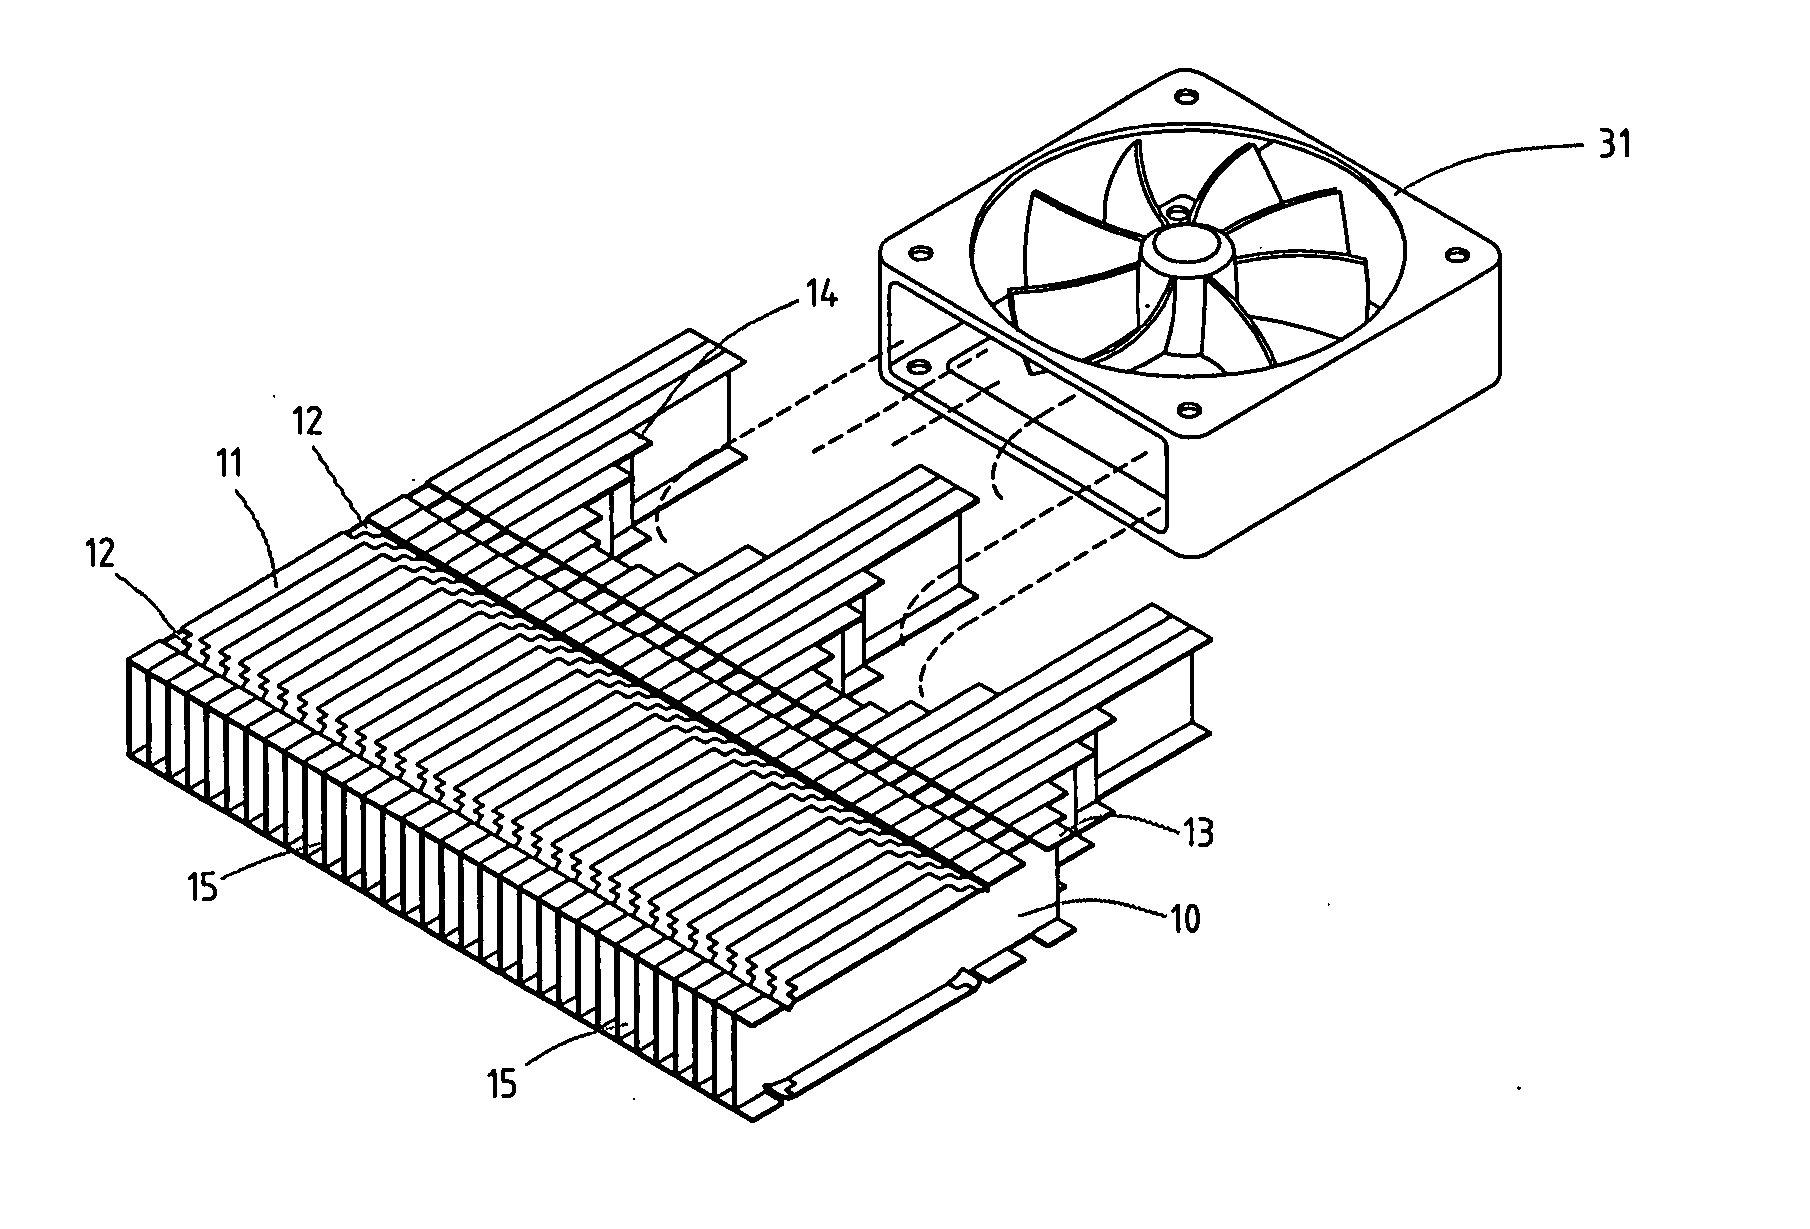 Heat dissipation device which is pre-built with an air vent structure